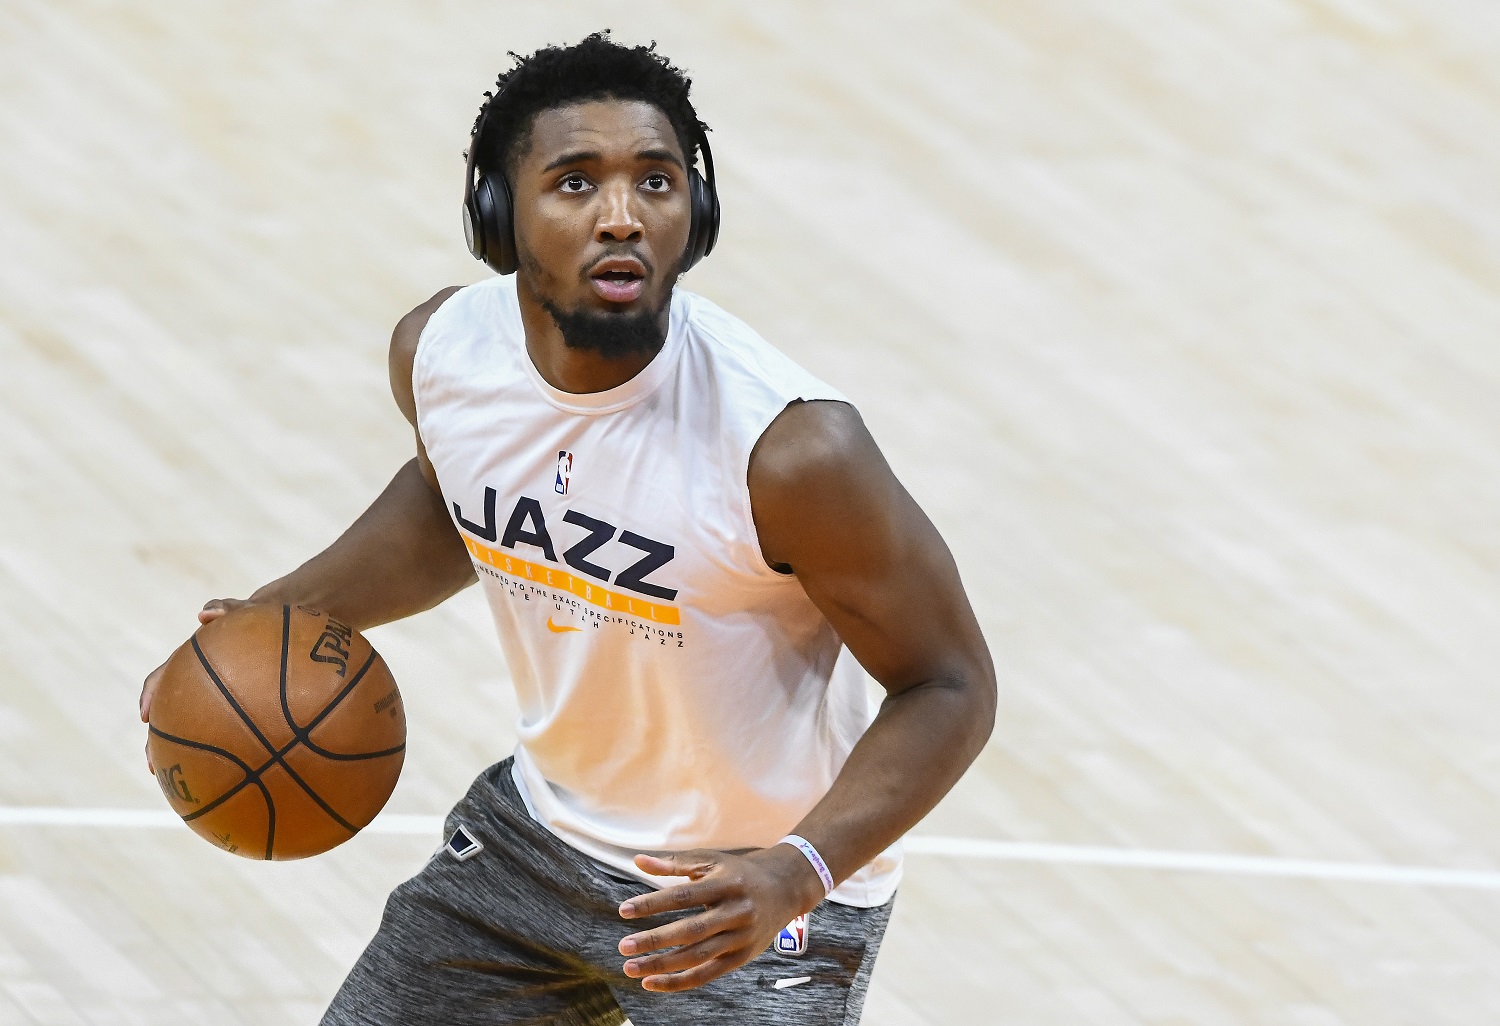 Donovan Mitchell of the Utah Jazz warms up before Game 5 of the Western Conference semifinals against the Los Angeles Clippers on June 16, 2021.